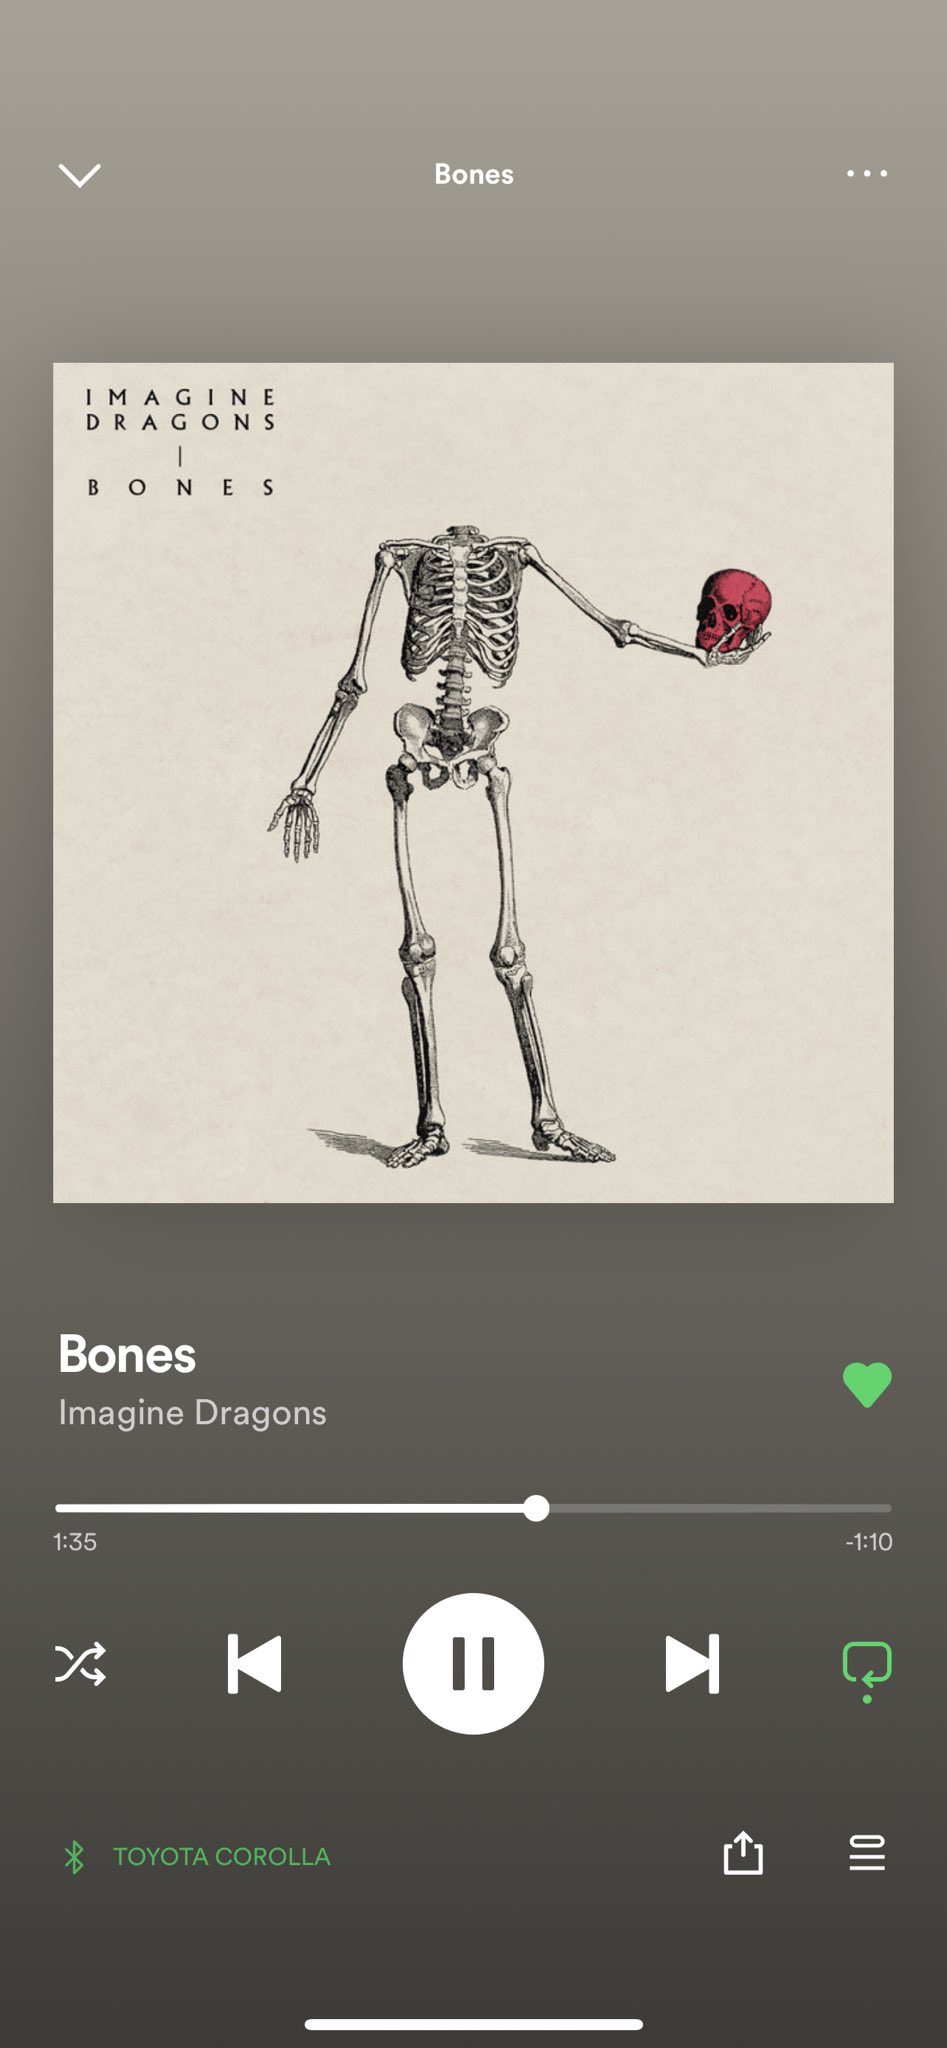 Imagine Dragons on Twitter "“Bones” out now https//t.co/Ruo5PchHer